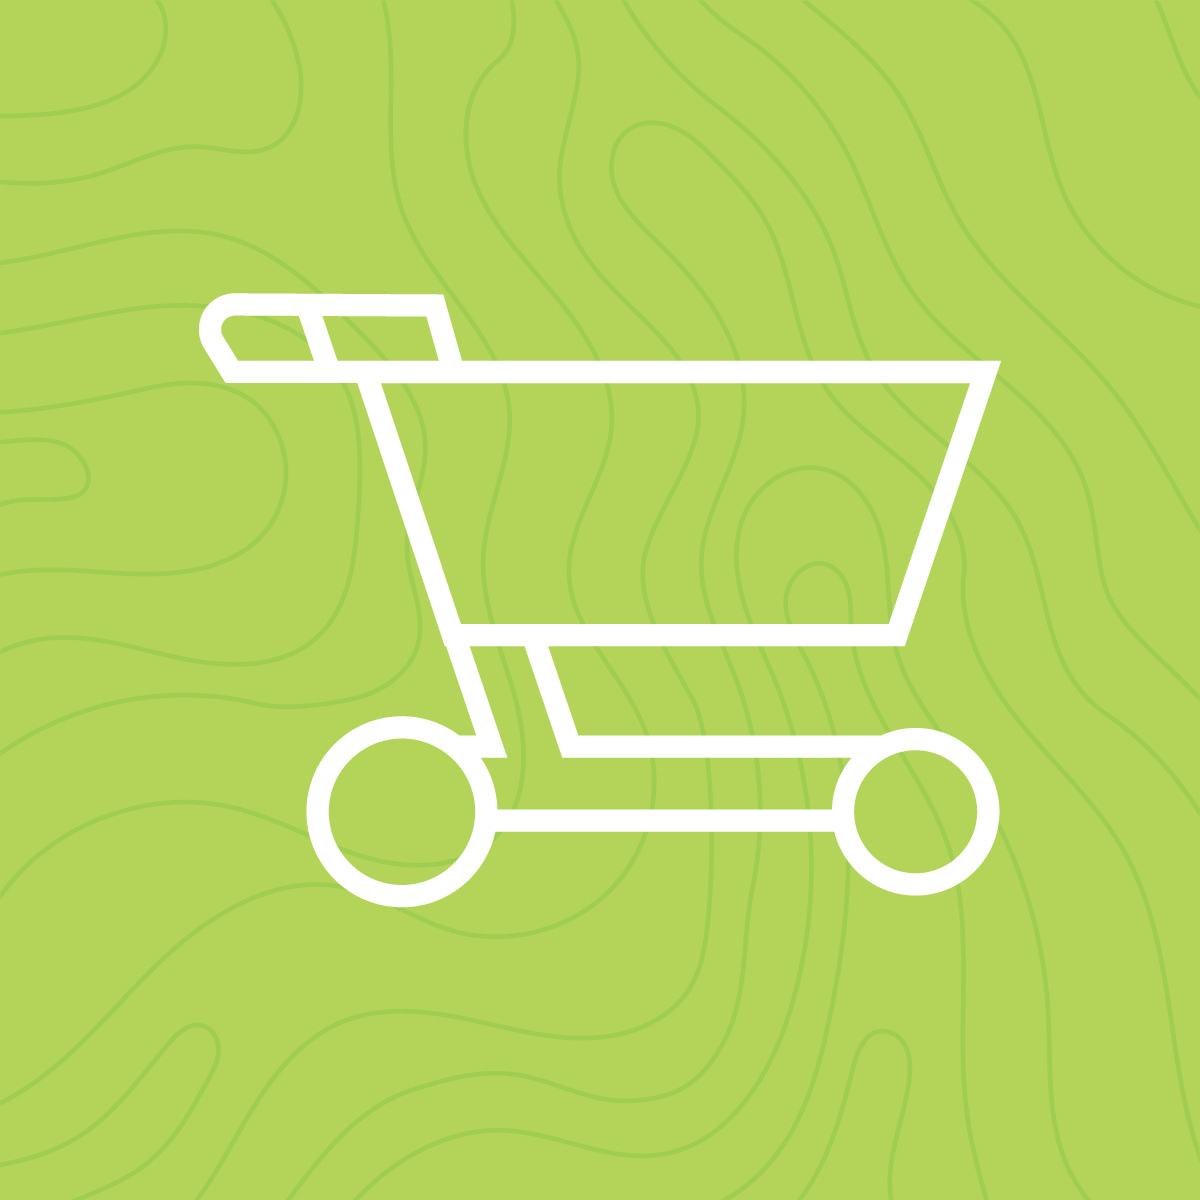 light green graphic with white outline of shopping cart